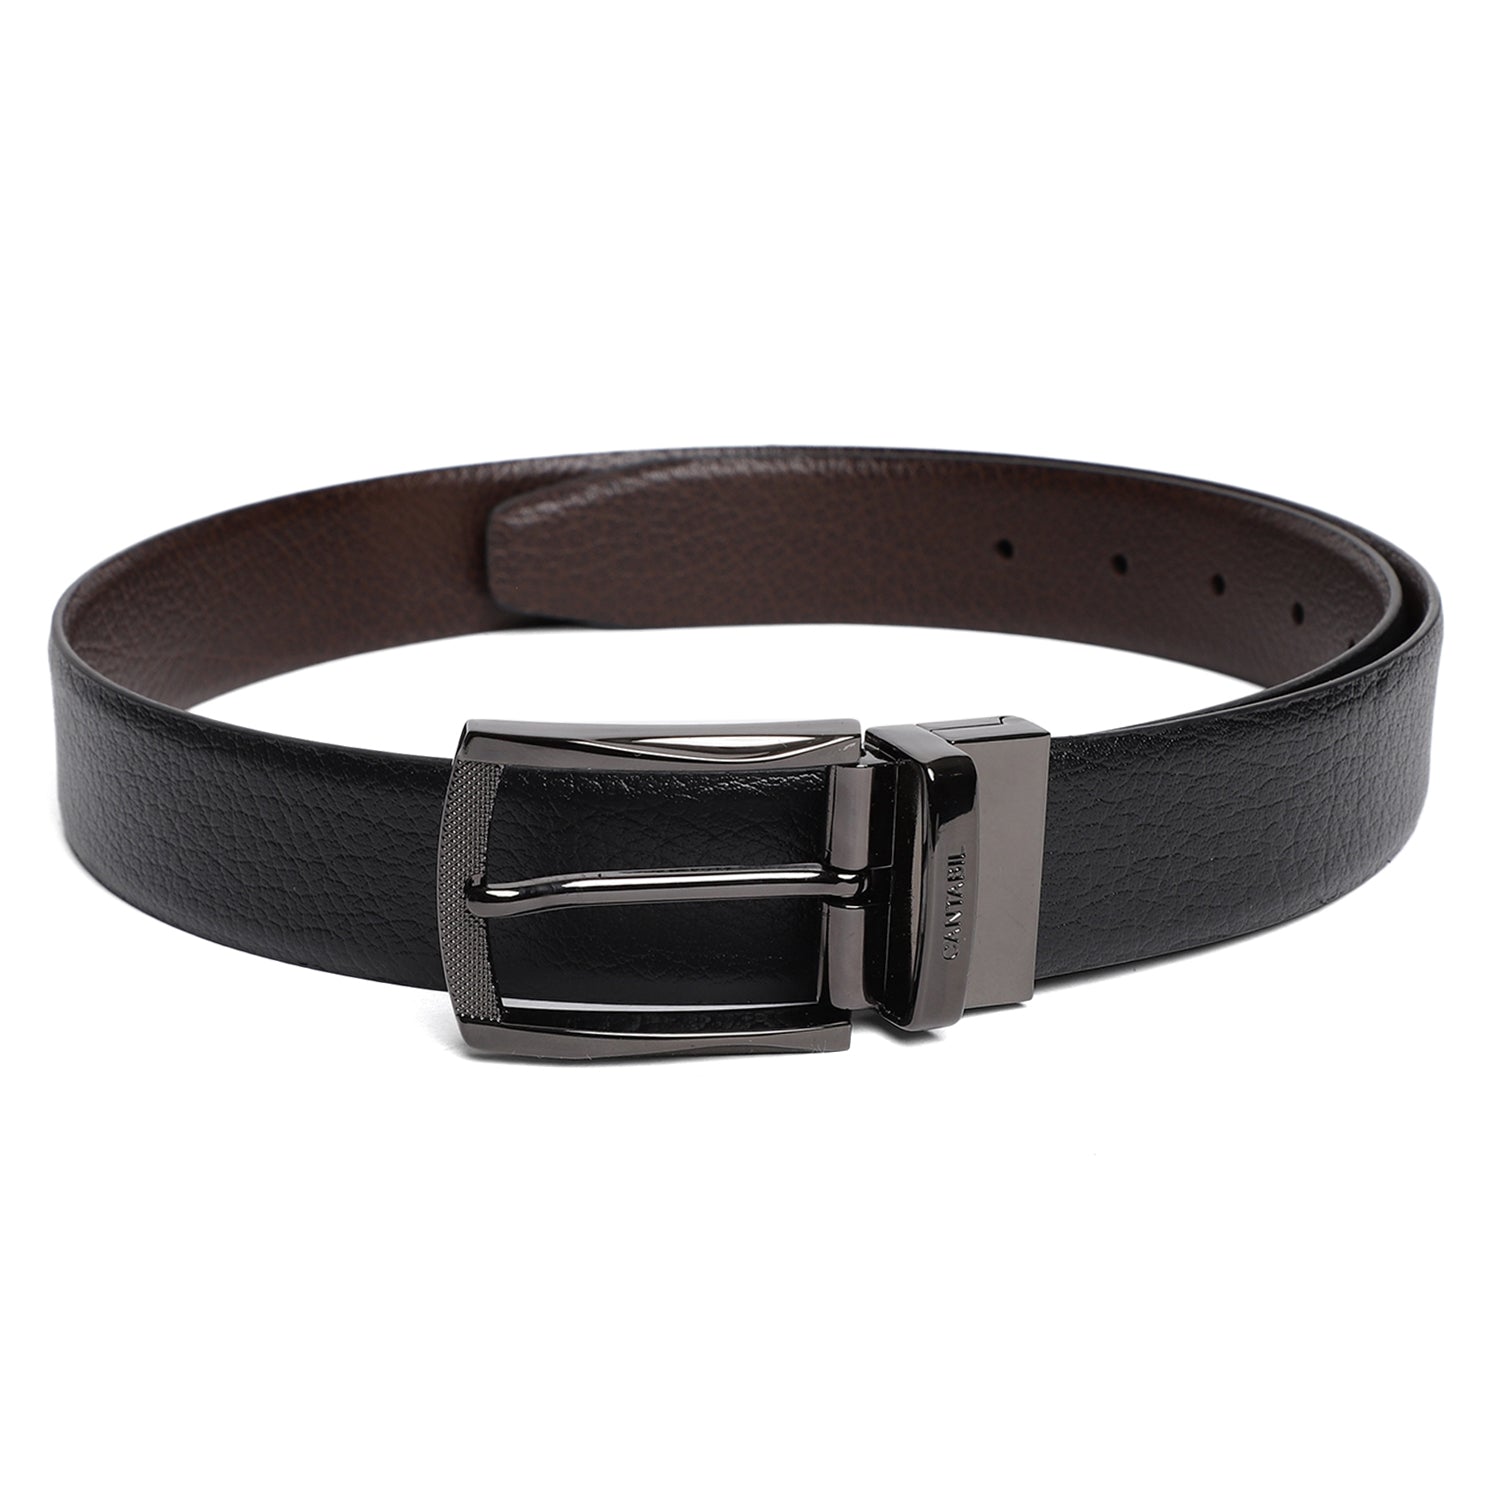 Fawn and Black Reversible Belt